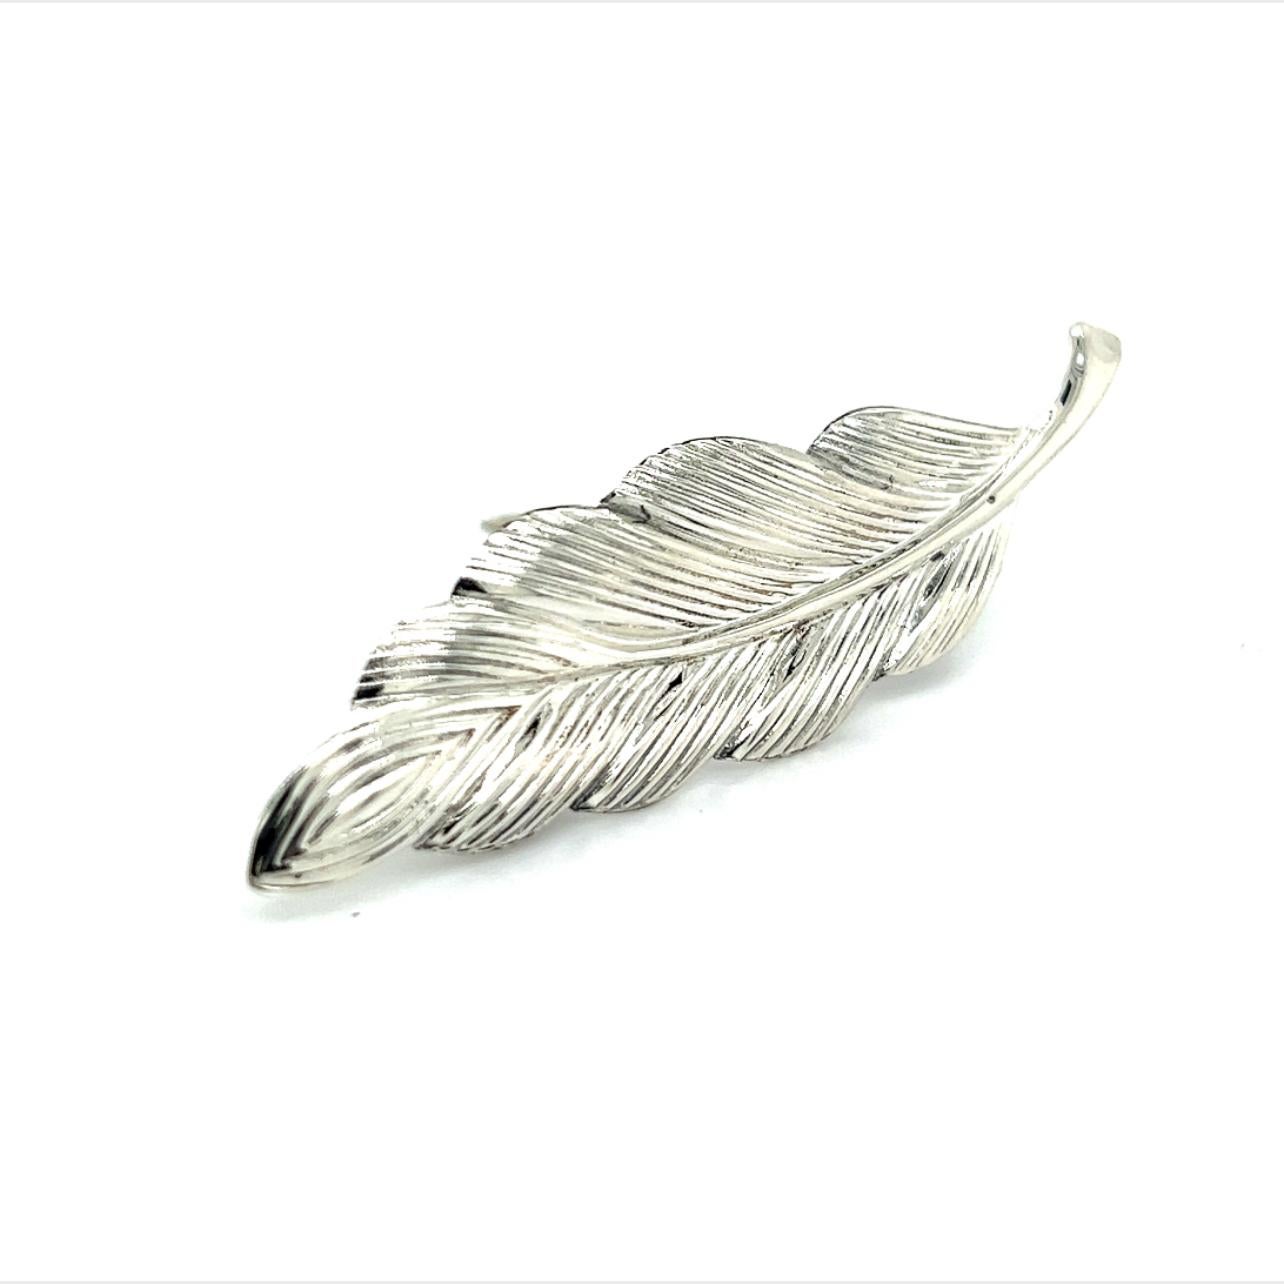 Tiffany & Co Estate Leaf Brooch Pin Sterling Silver TIF289
 
TRUSTED SELLER SINCE 2002
 
PLEASE SEE OUR HUNDREDS OF POSITIVE FEEDBACKS FROM OUR CLIENTS!!
 
FREE SHIPPING!!

DETAILS
Style: Leaf
Weight: 4.2 Grams
Metal: Sterling Silver
 
The Tiffany &